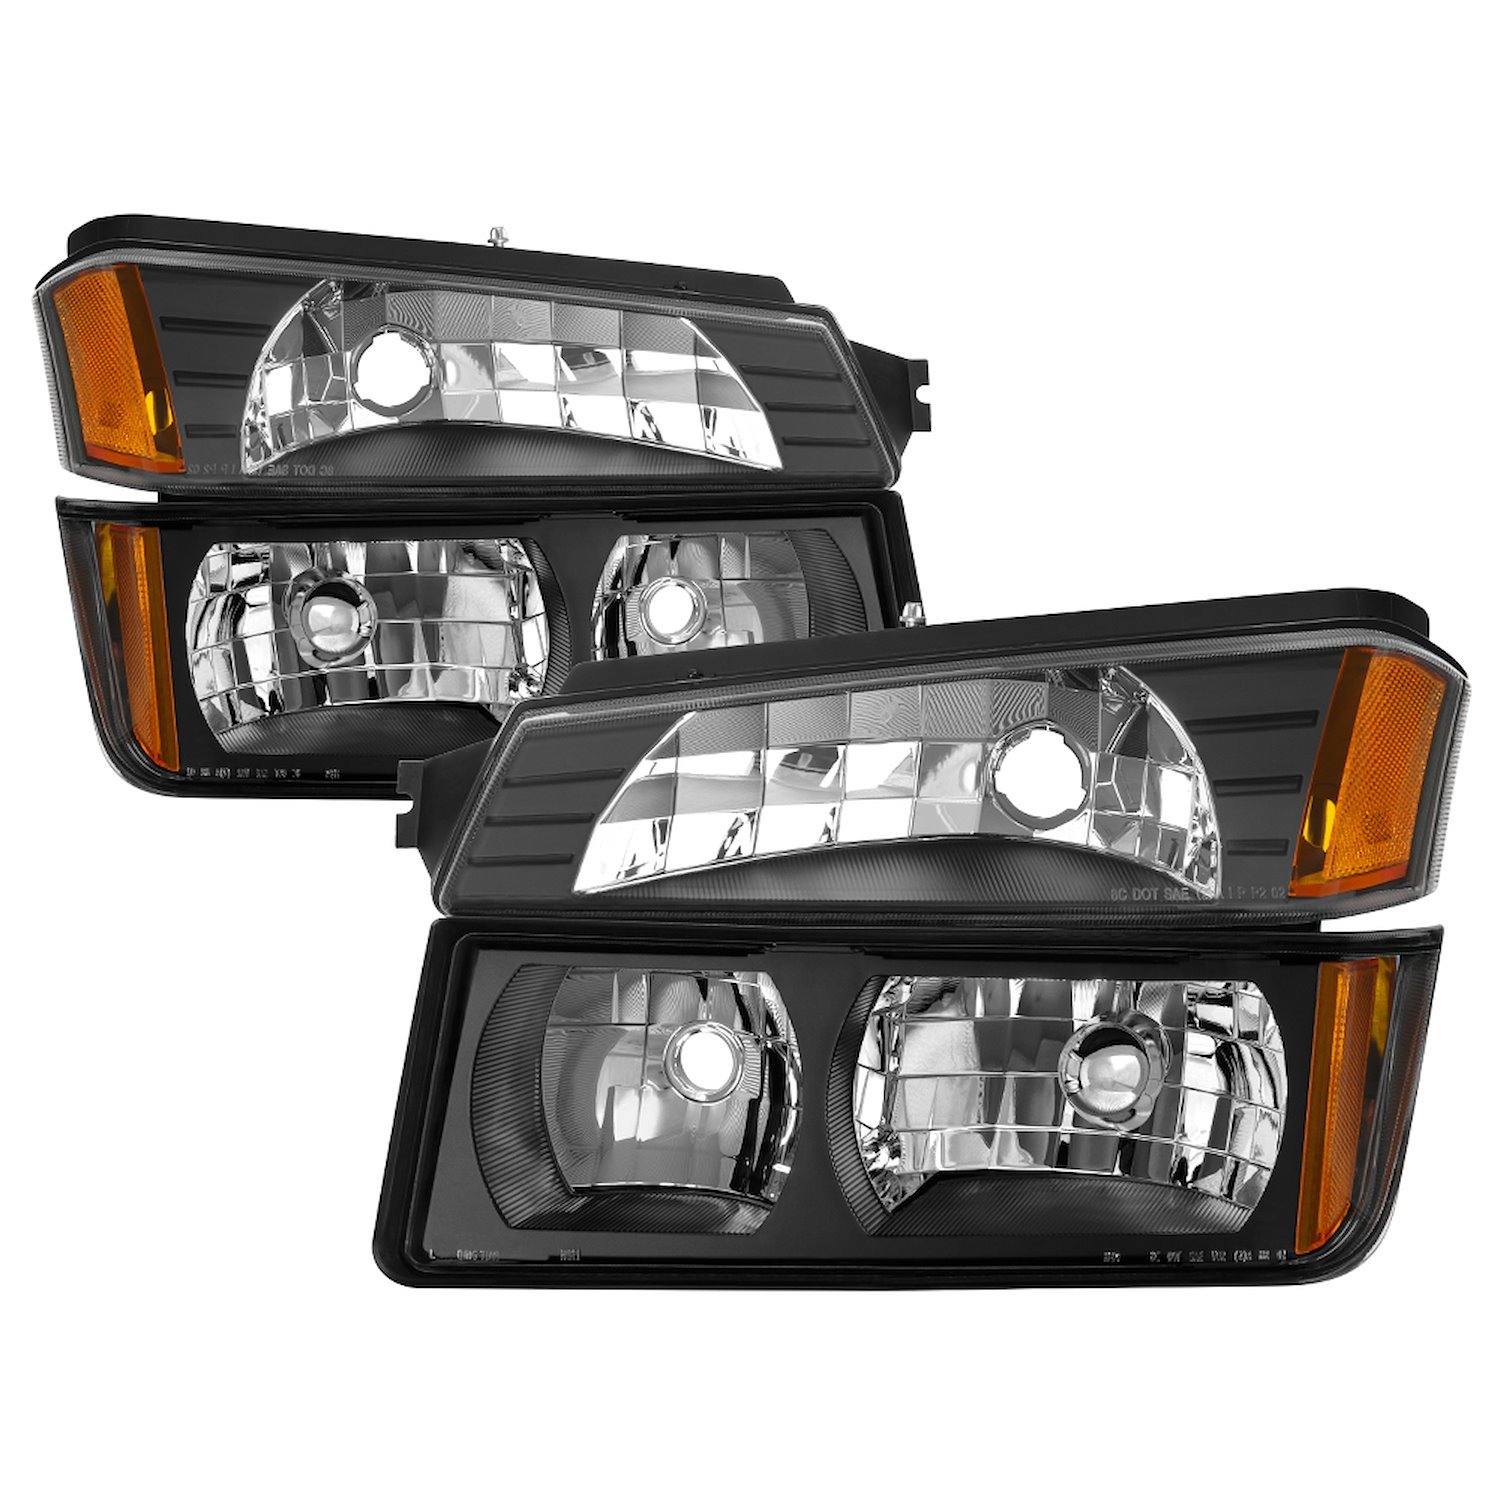 xTune OEM Style Crystal Headlights 2002-2006 Chevy Avalanche